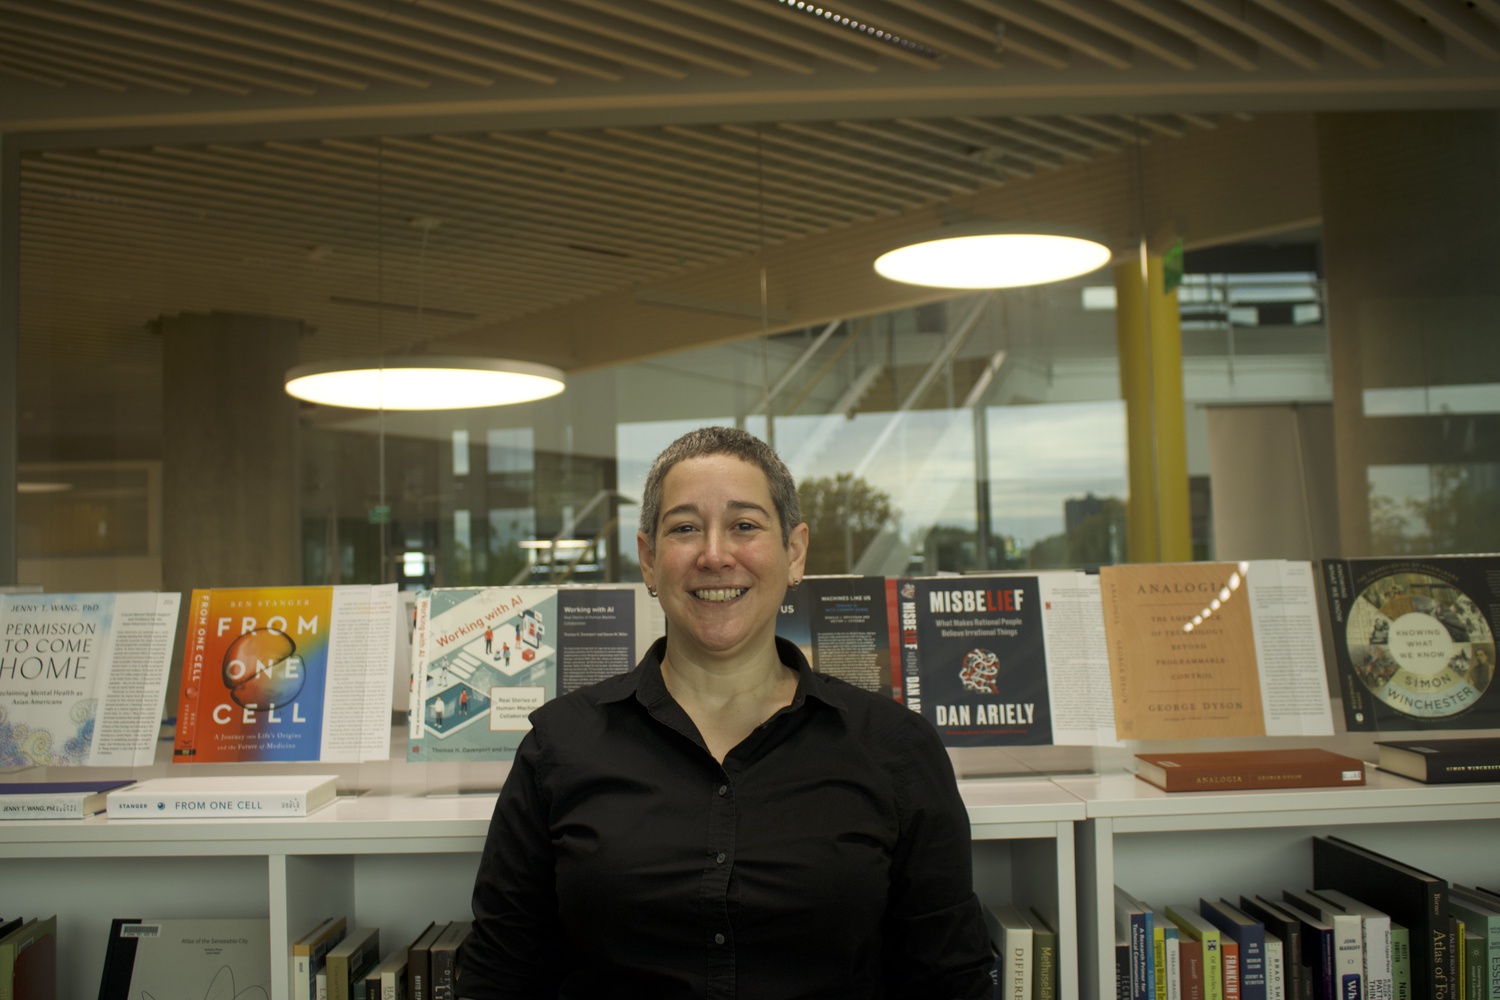 Robyn Rosenberg, the engineering librarian at the SEC library, curated the collection from scratch. “A lot of these books are written by non-white men, and we’re having a lot of international authors, women authors,” Rosenberg says.